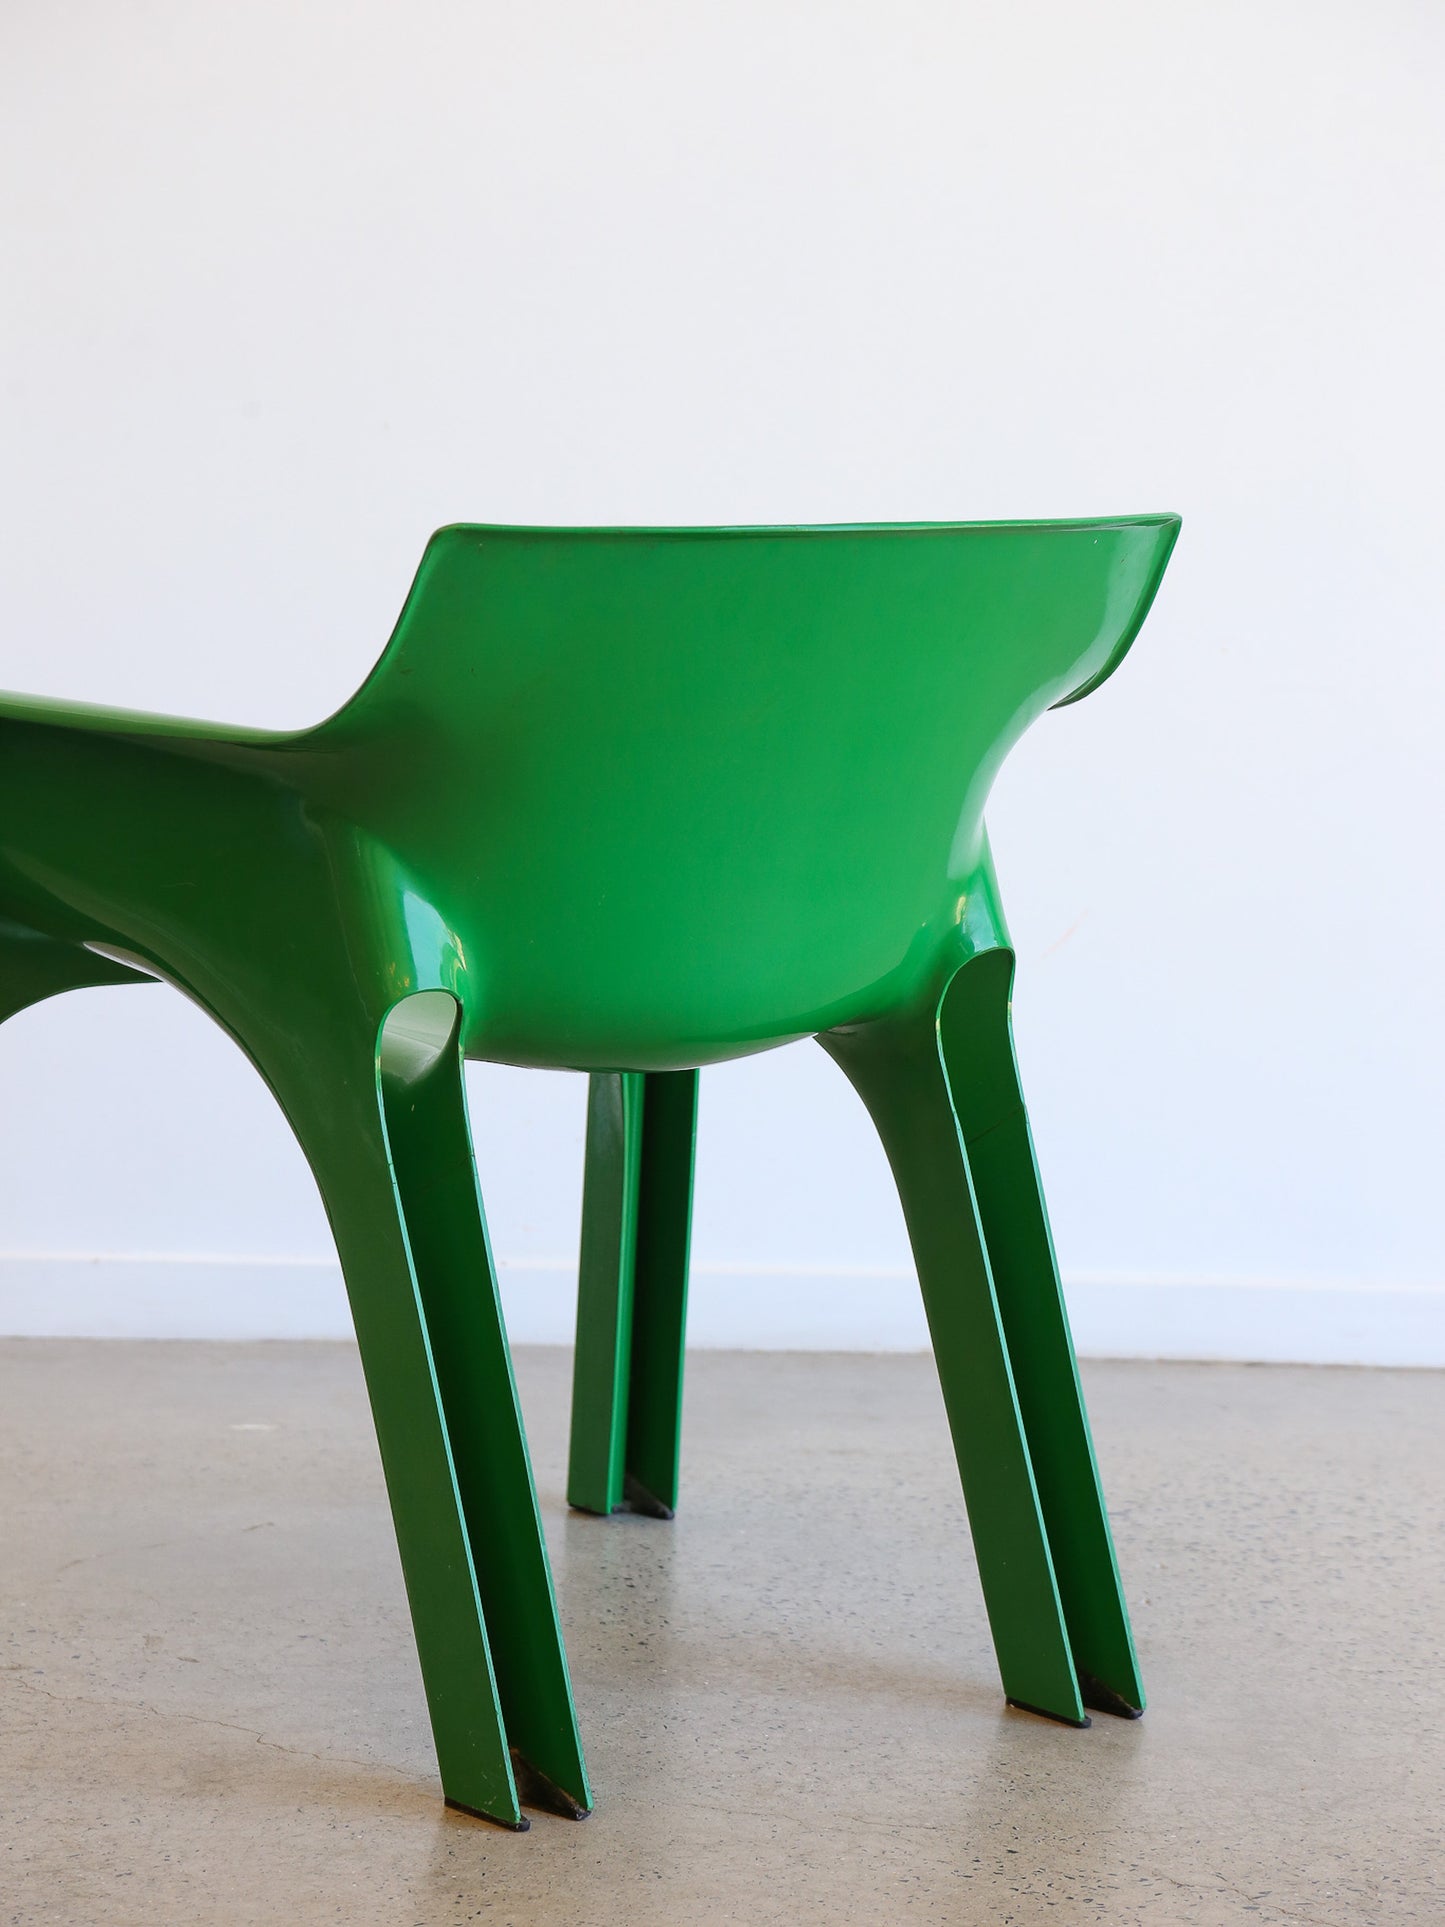 Gaudi Green Chair by Vico Magistretti for Artemide 1970s